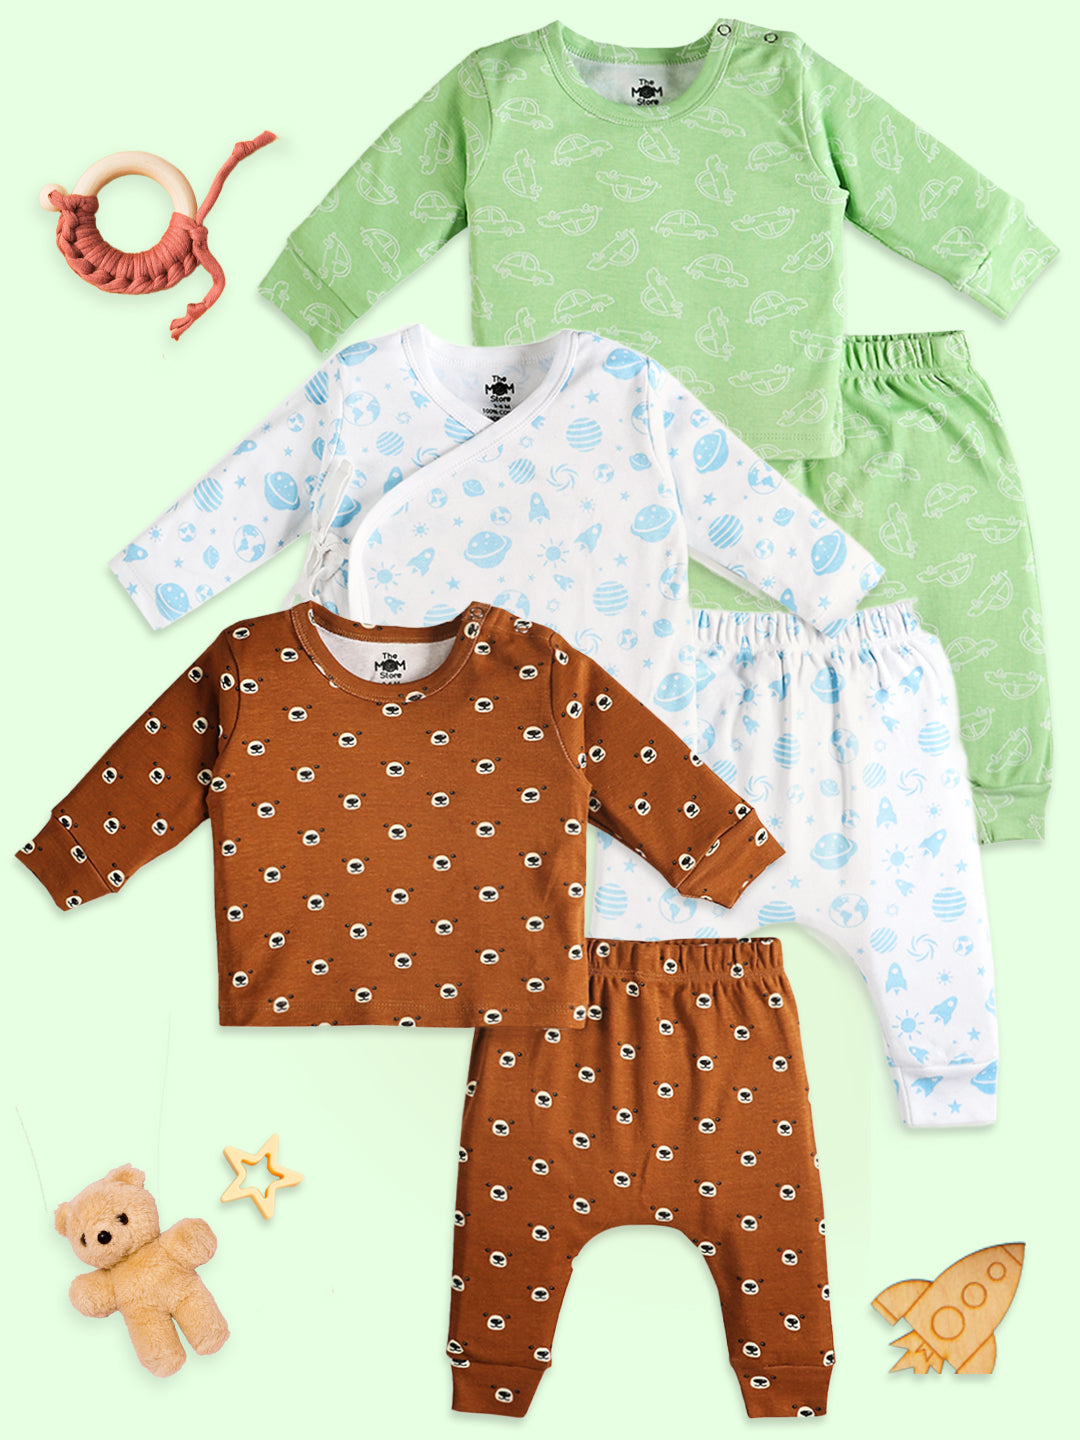 Infant Pajama Set Combo Of 3: Vrrom Vrrom-Out Of World-Beary Best